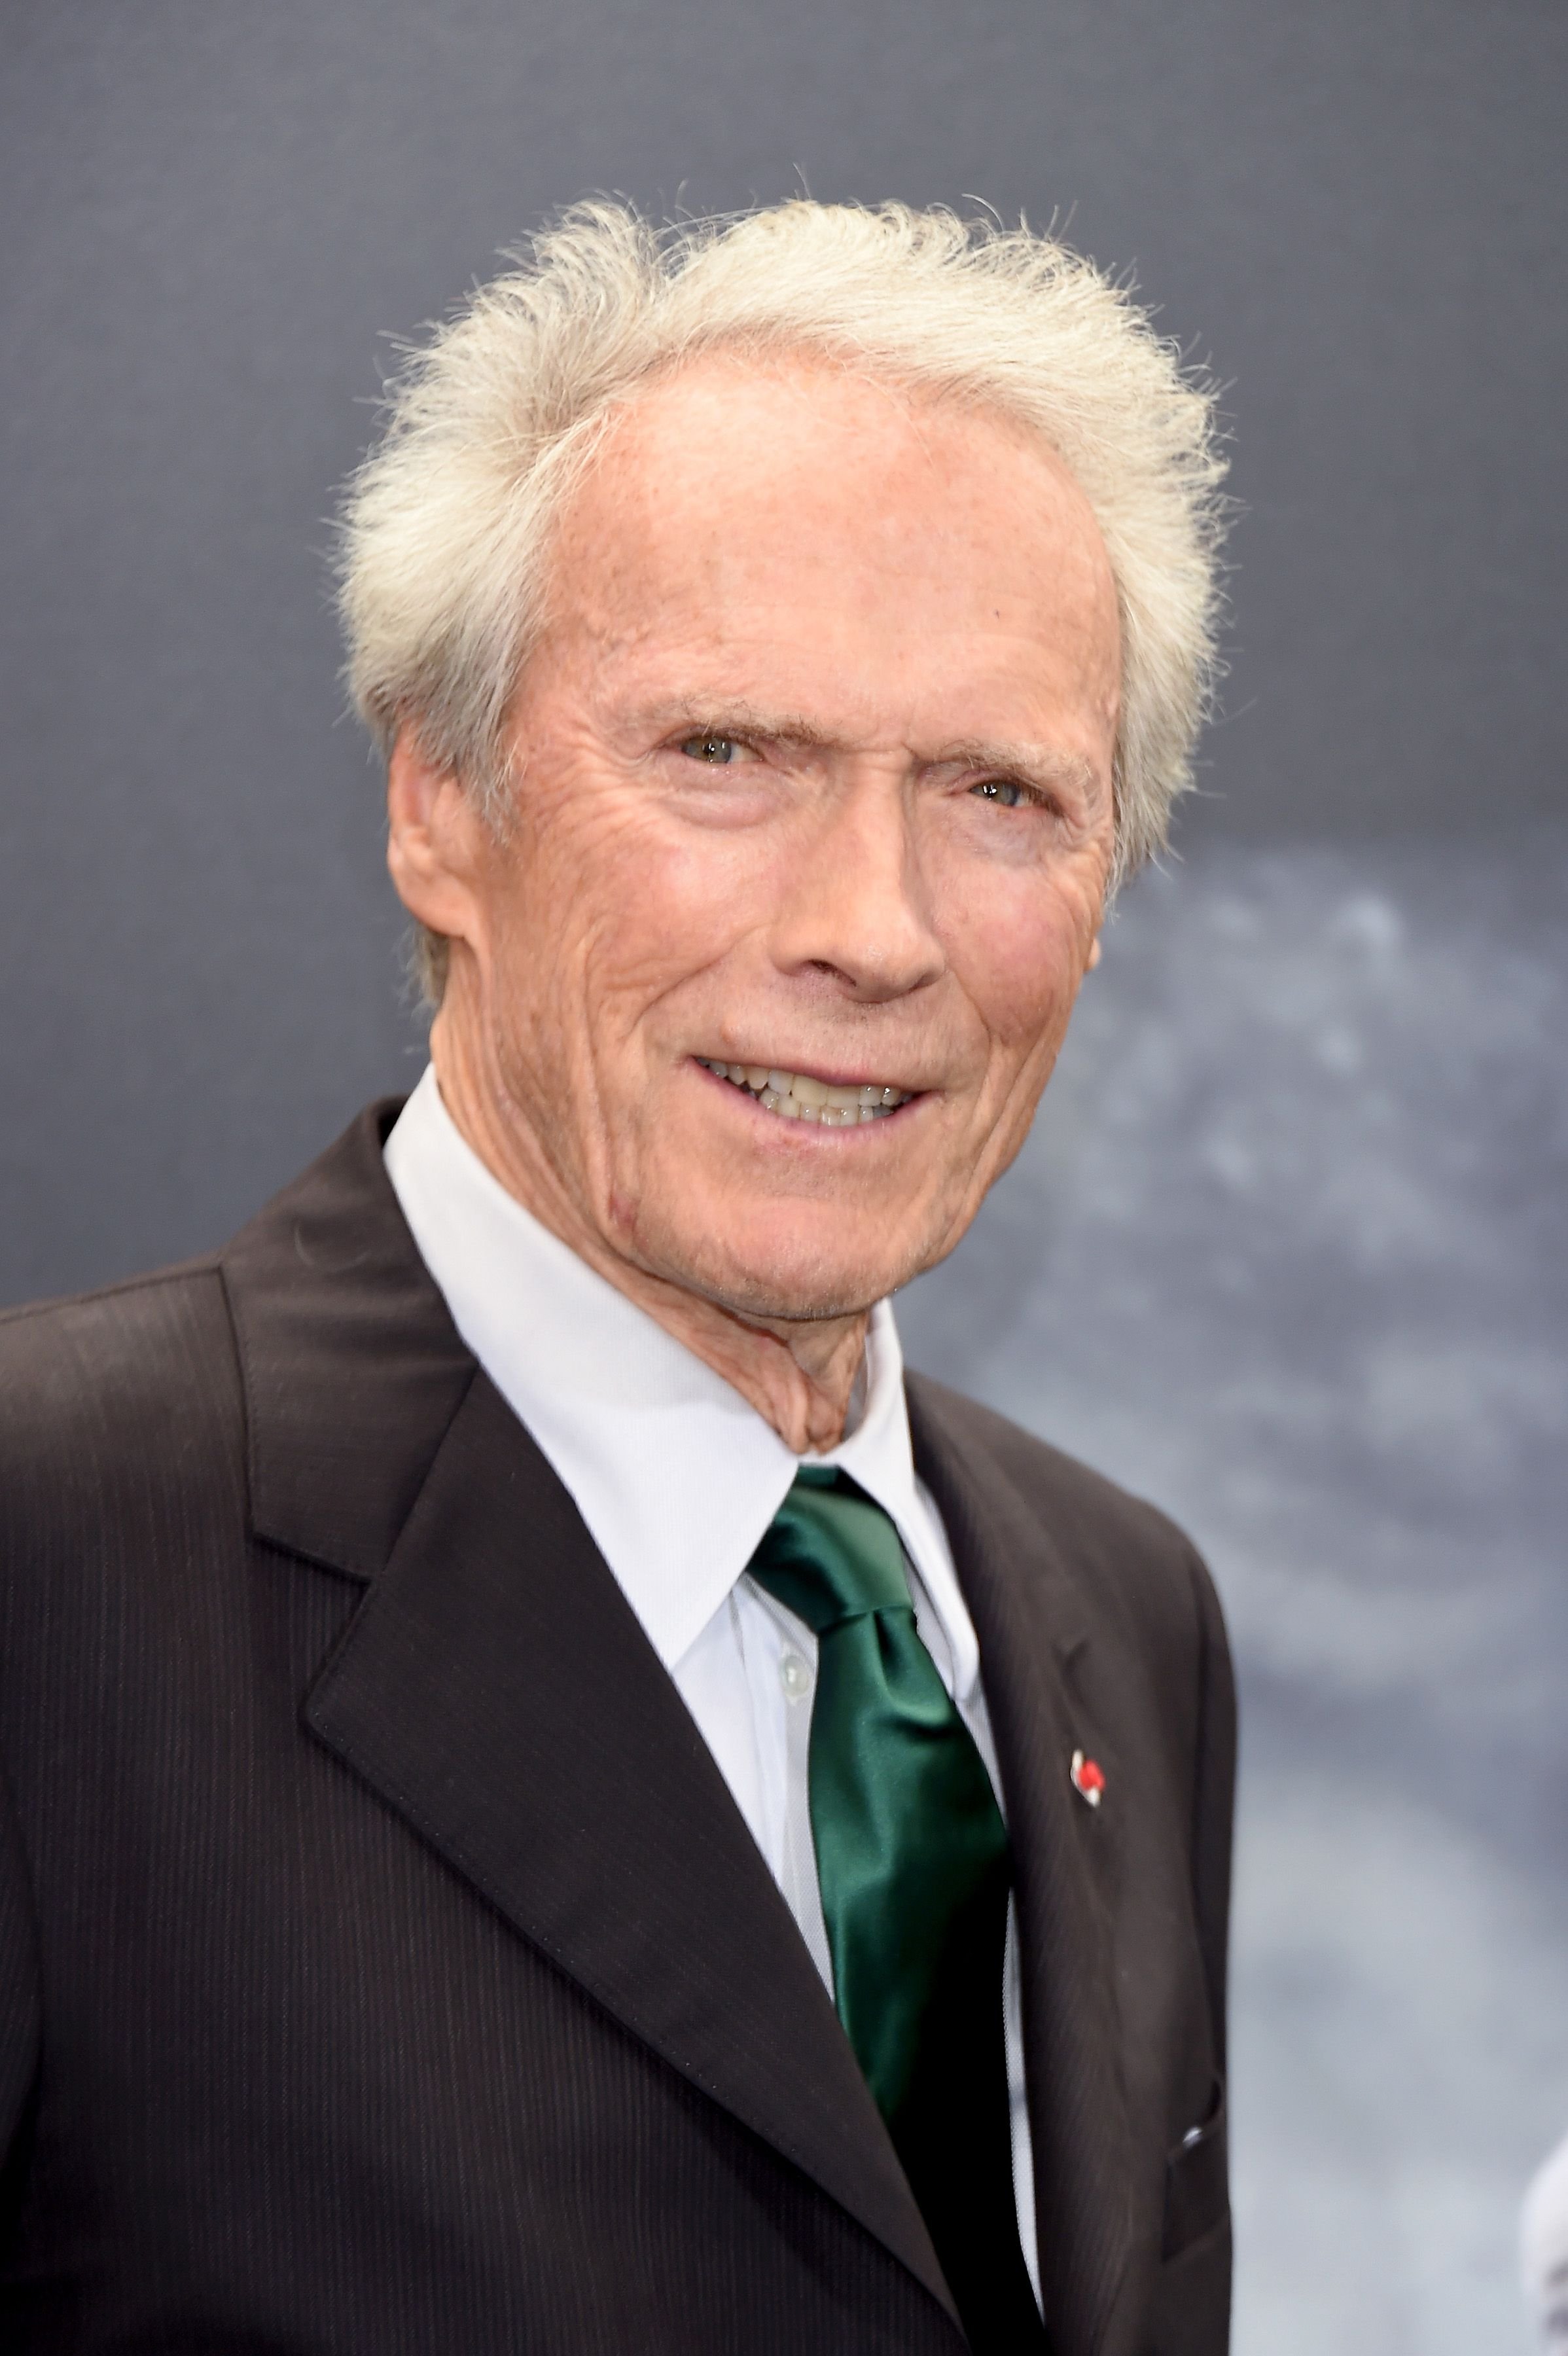 Clint Eastwood at the "Sully" New York Premiere at Alice Tully Hall in New York City | Photo: Michael Loccisano/Getty Images